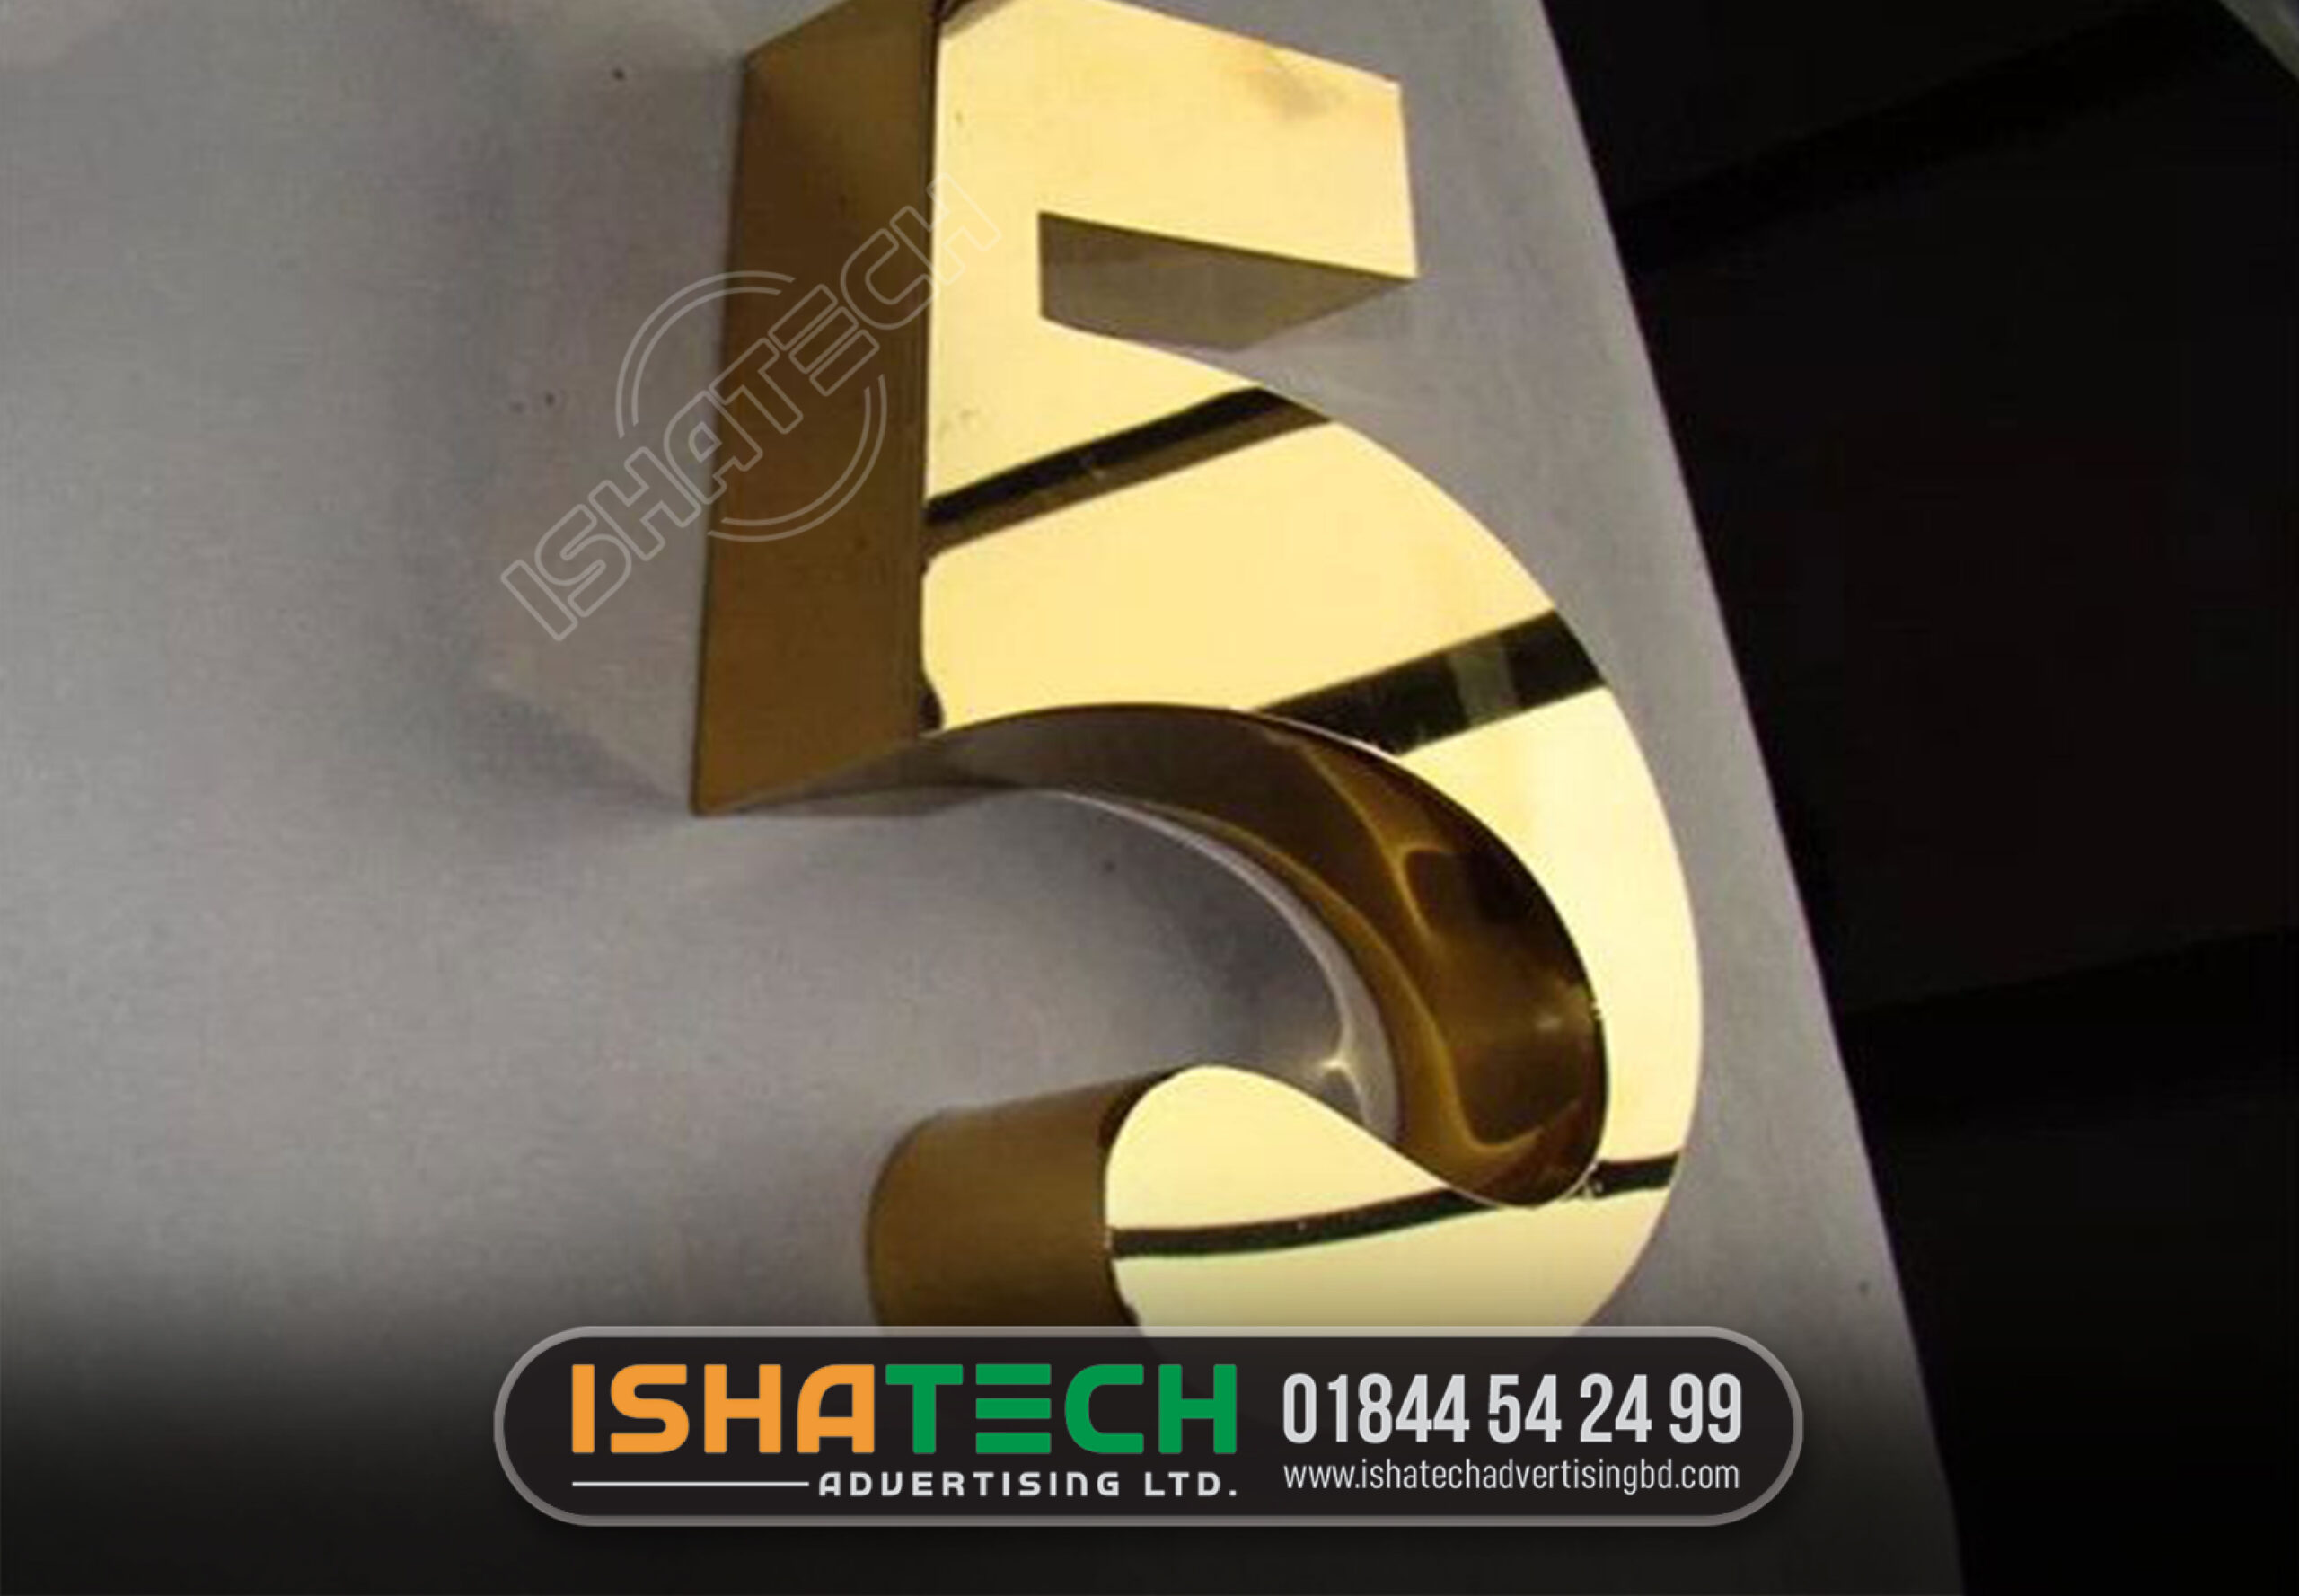 SS Sign Board Our range of products include LED SS -304 Letter With Wooden Back Ground, Golden SS Letter 304 Grade, SS Sign Board, Golden SS Letter Sign Board With Golden ACP Back Ground, SS LETTER and SS Collar Acrylic LED Letter.